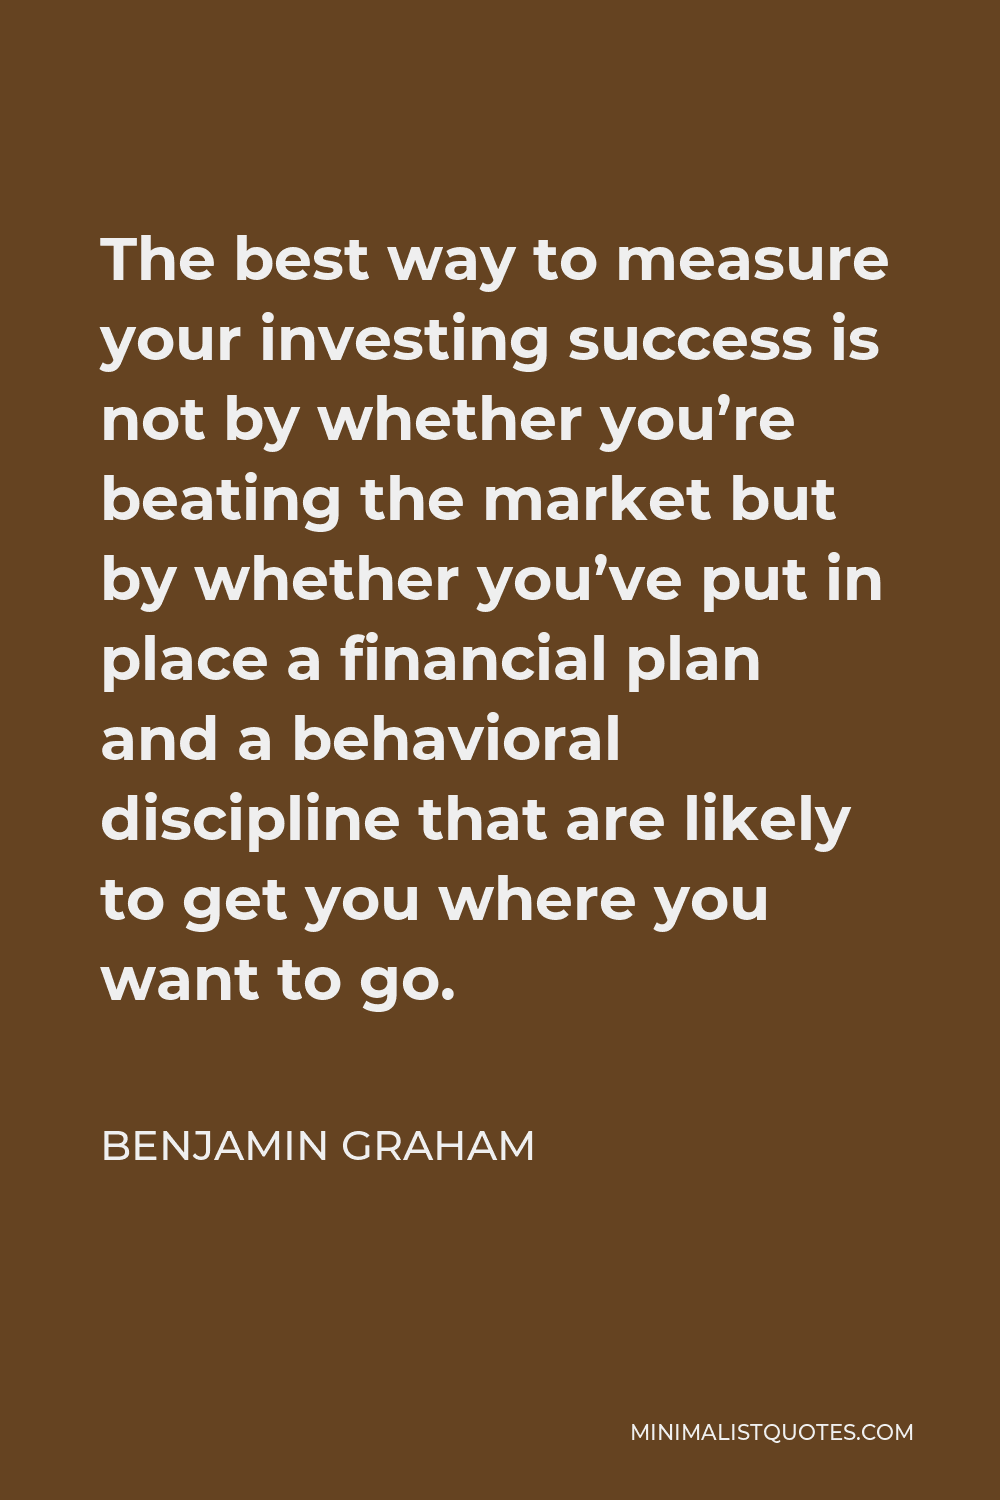 Benjamin Graham Quote - The best way to measure your investing success is not by whether you’re beating the market but by whether you’ve put in place a financial plan and a behavioral discipline that are likely to get you where you want to go.